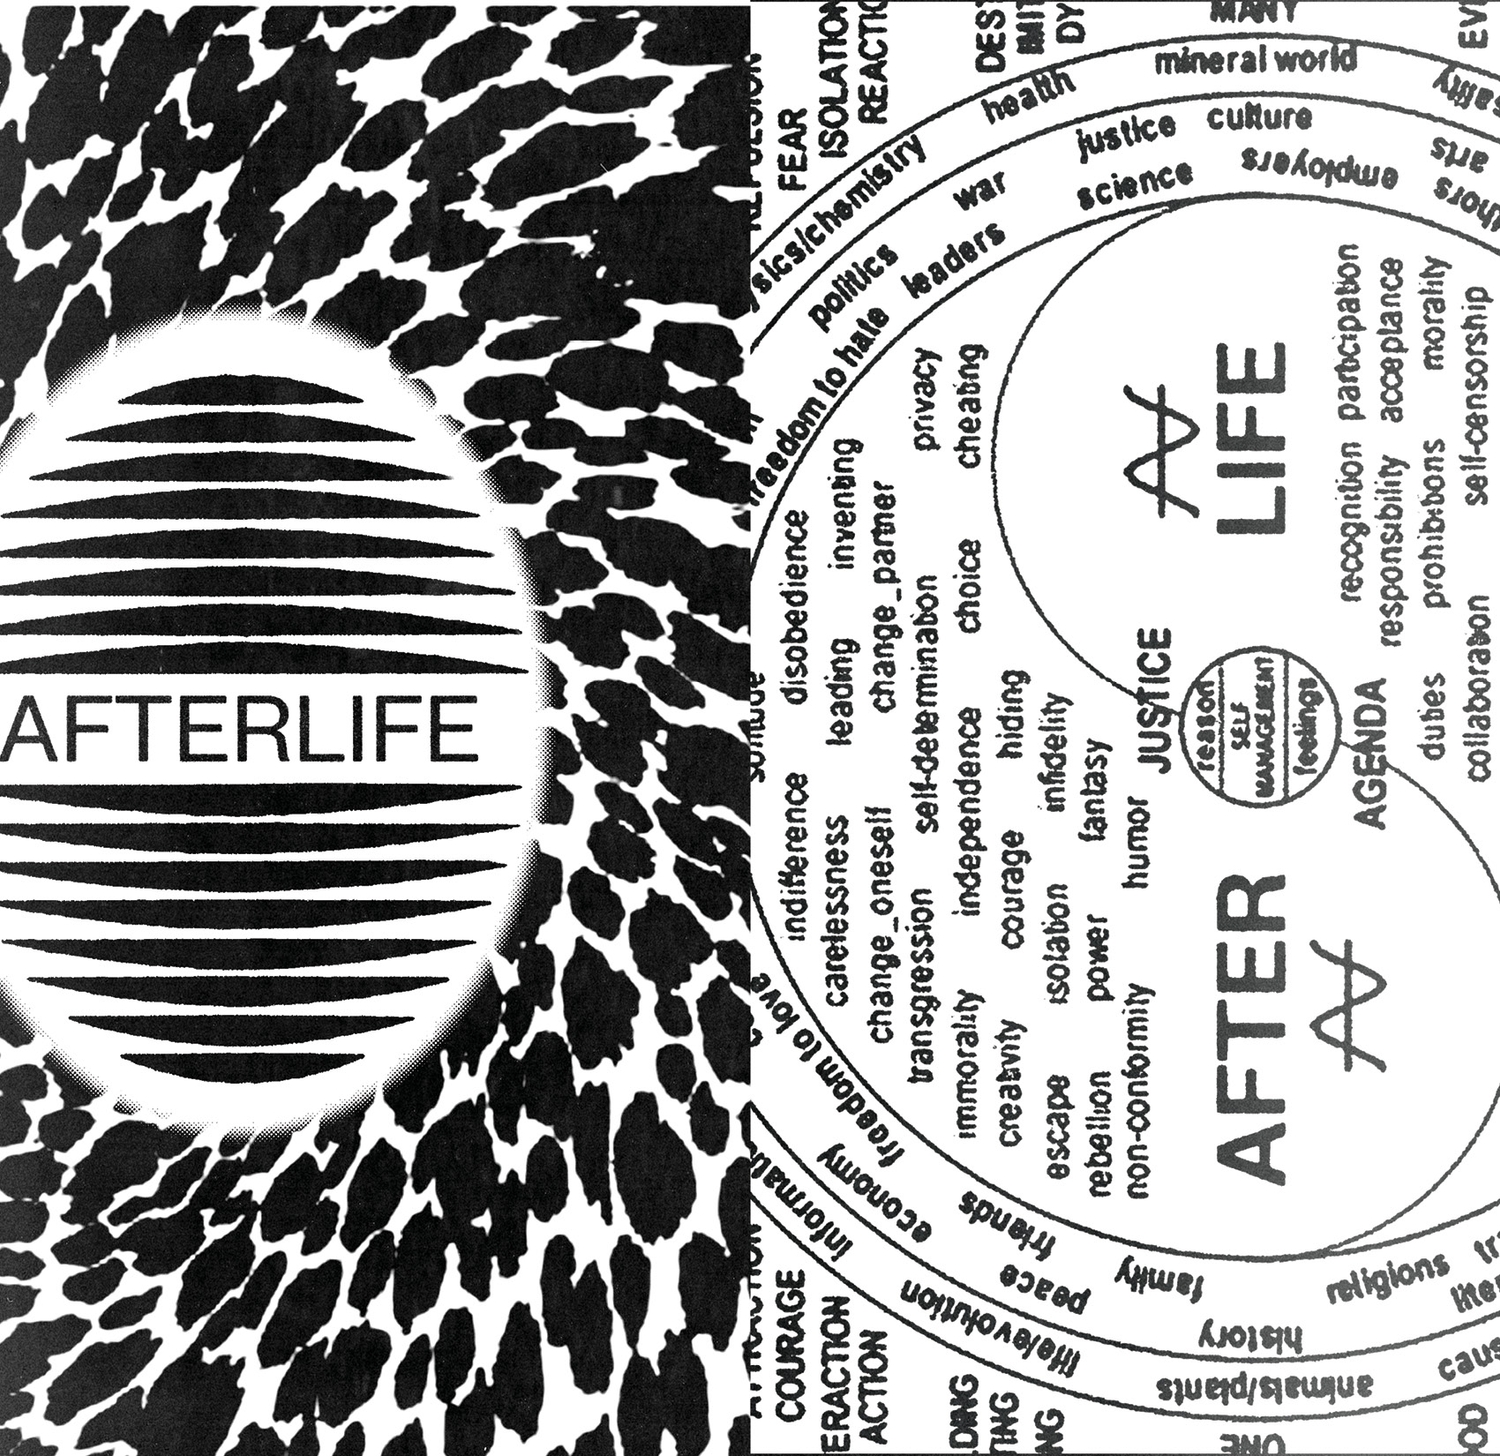 Afterlife - Brand Design - Ying and Yang | Atollon - a design company